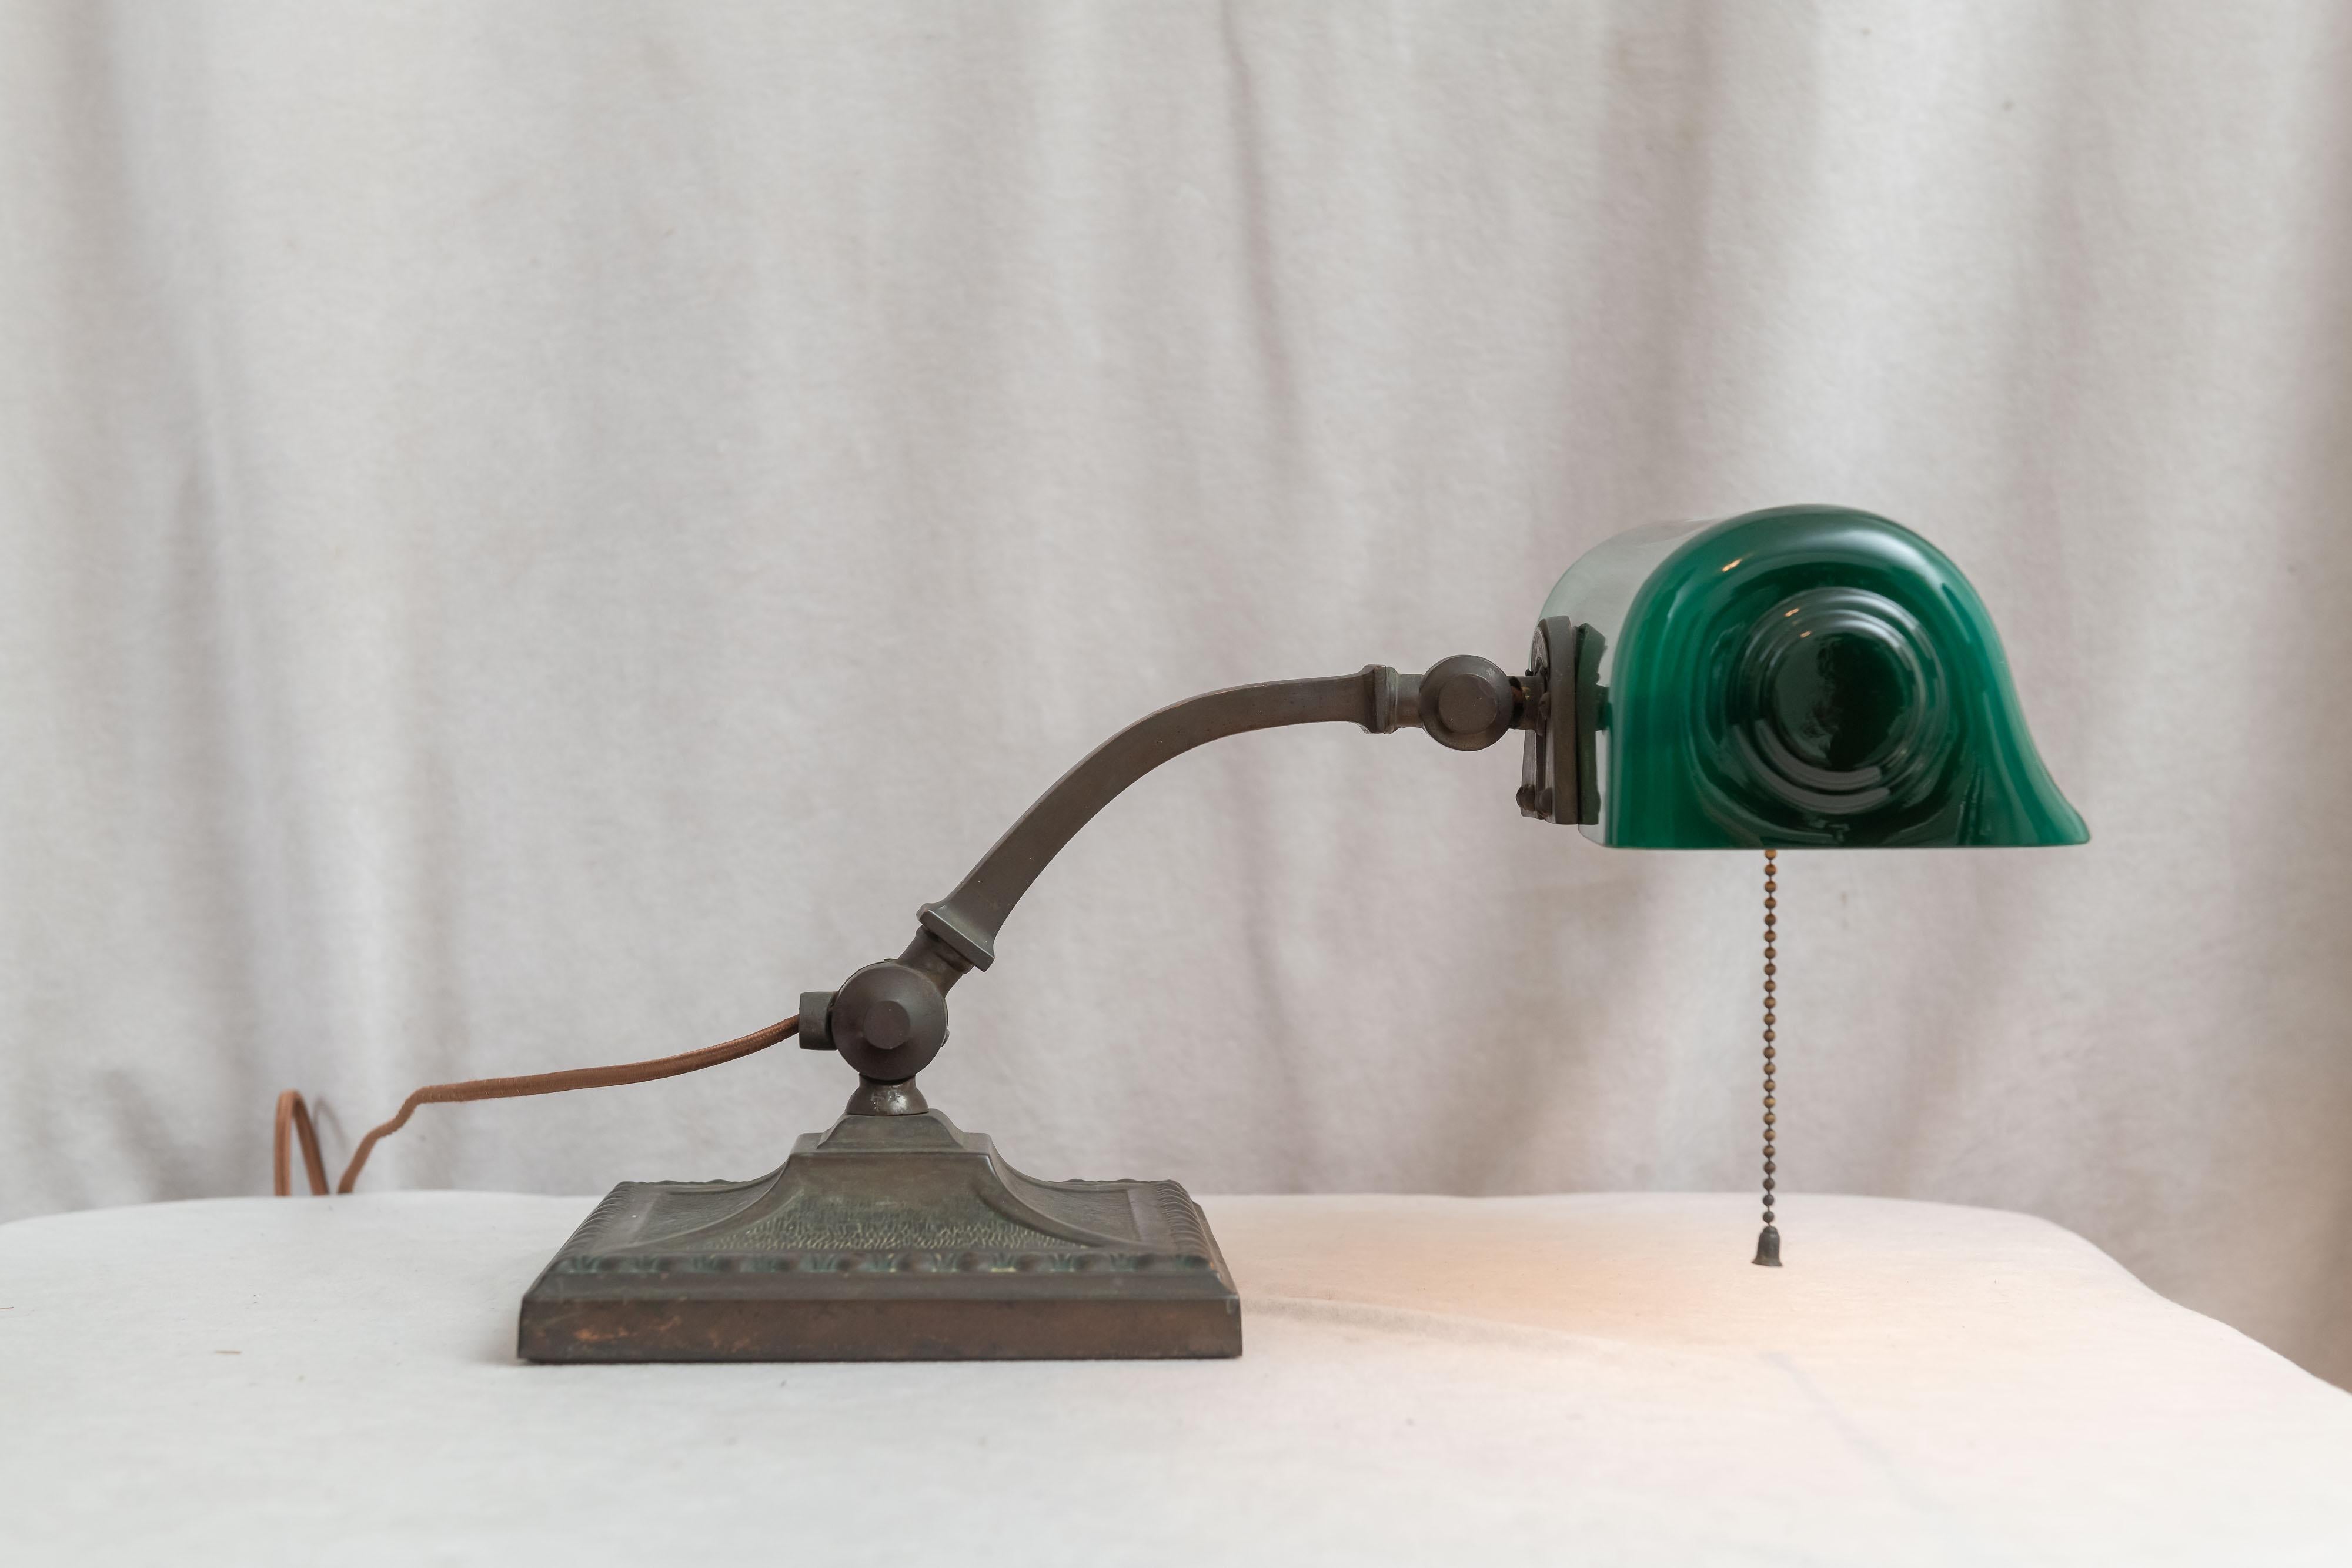 Hand-Crafted Green Shade Banker's Desk Lamp by Verdelite, ca. 1918